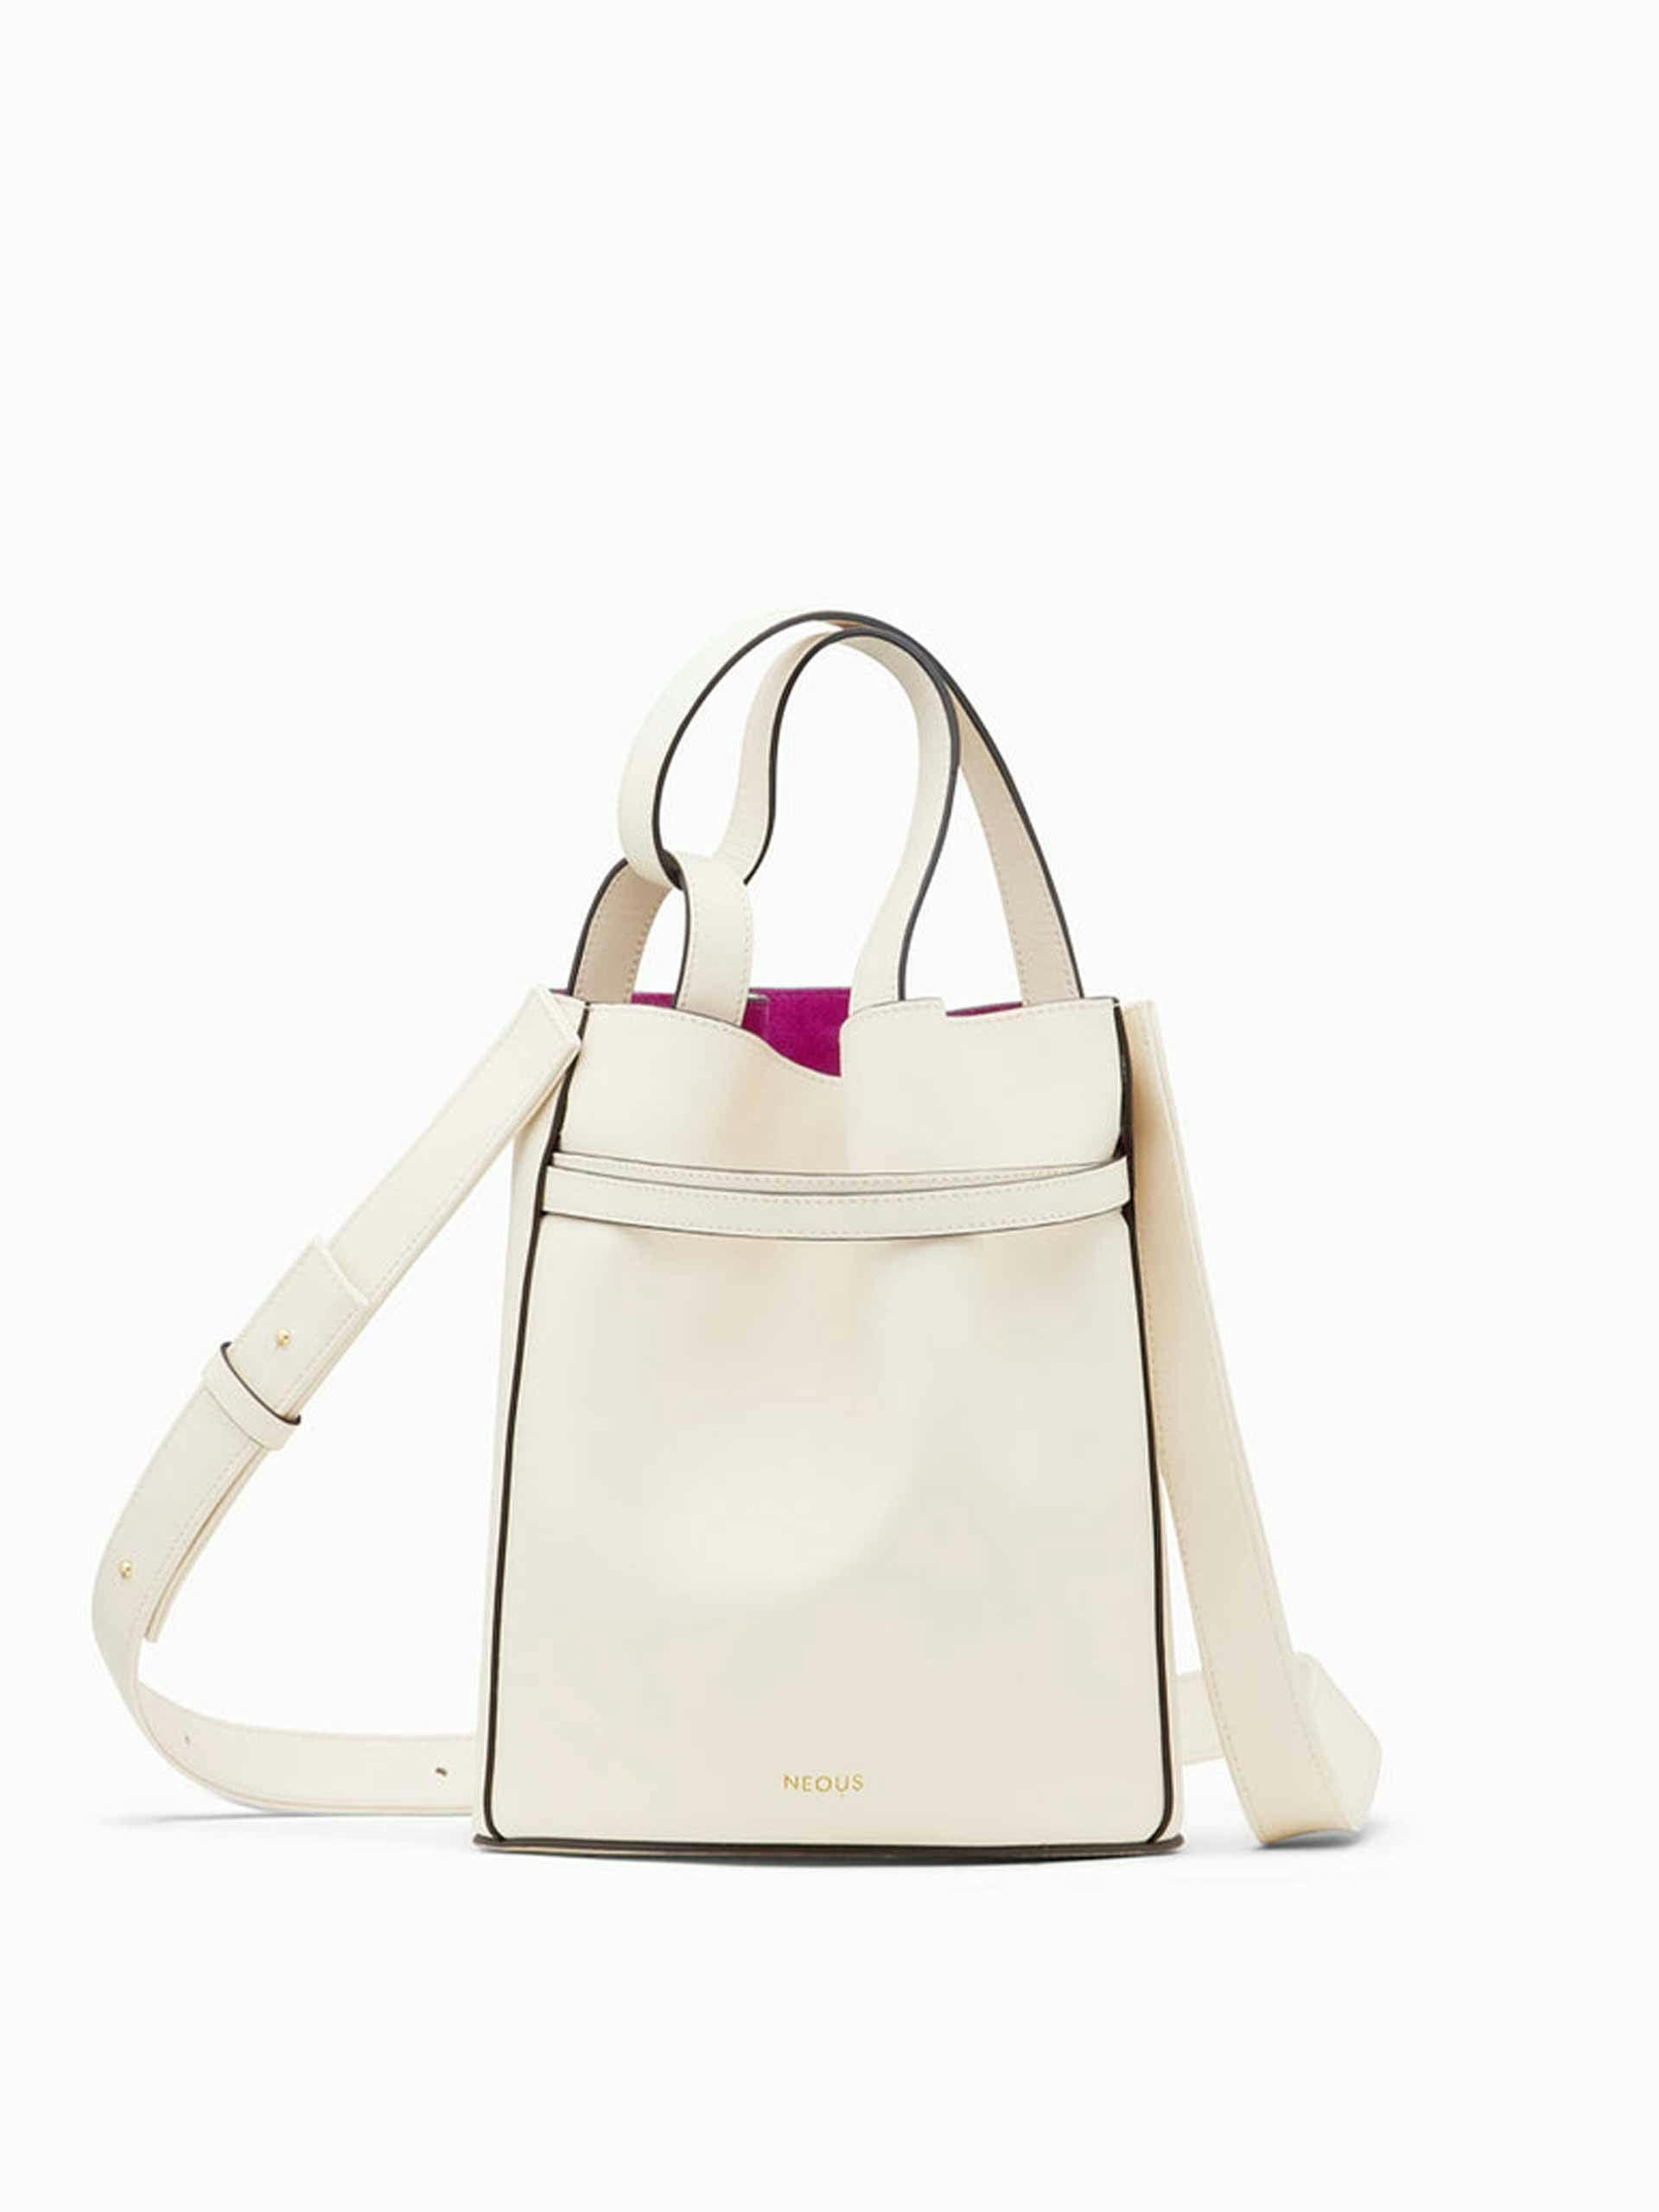 Small white leather tote